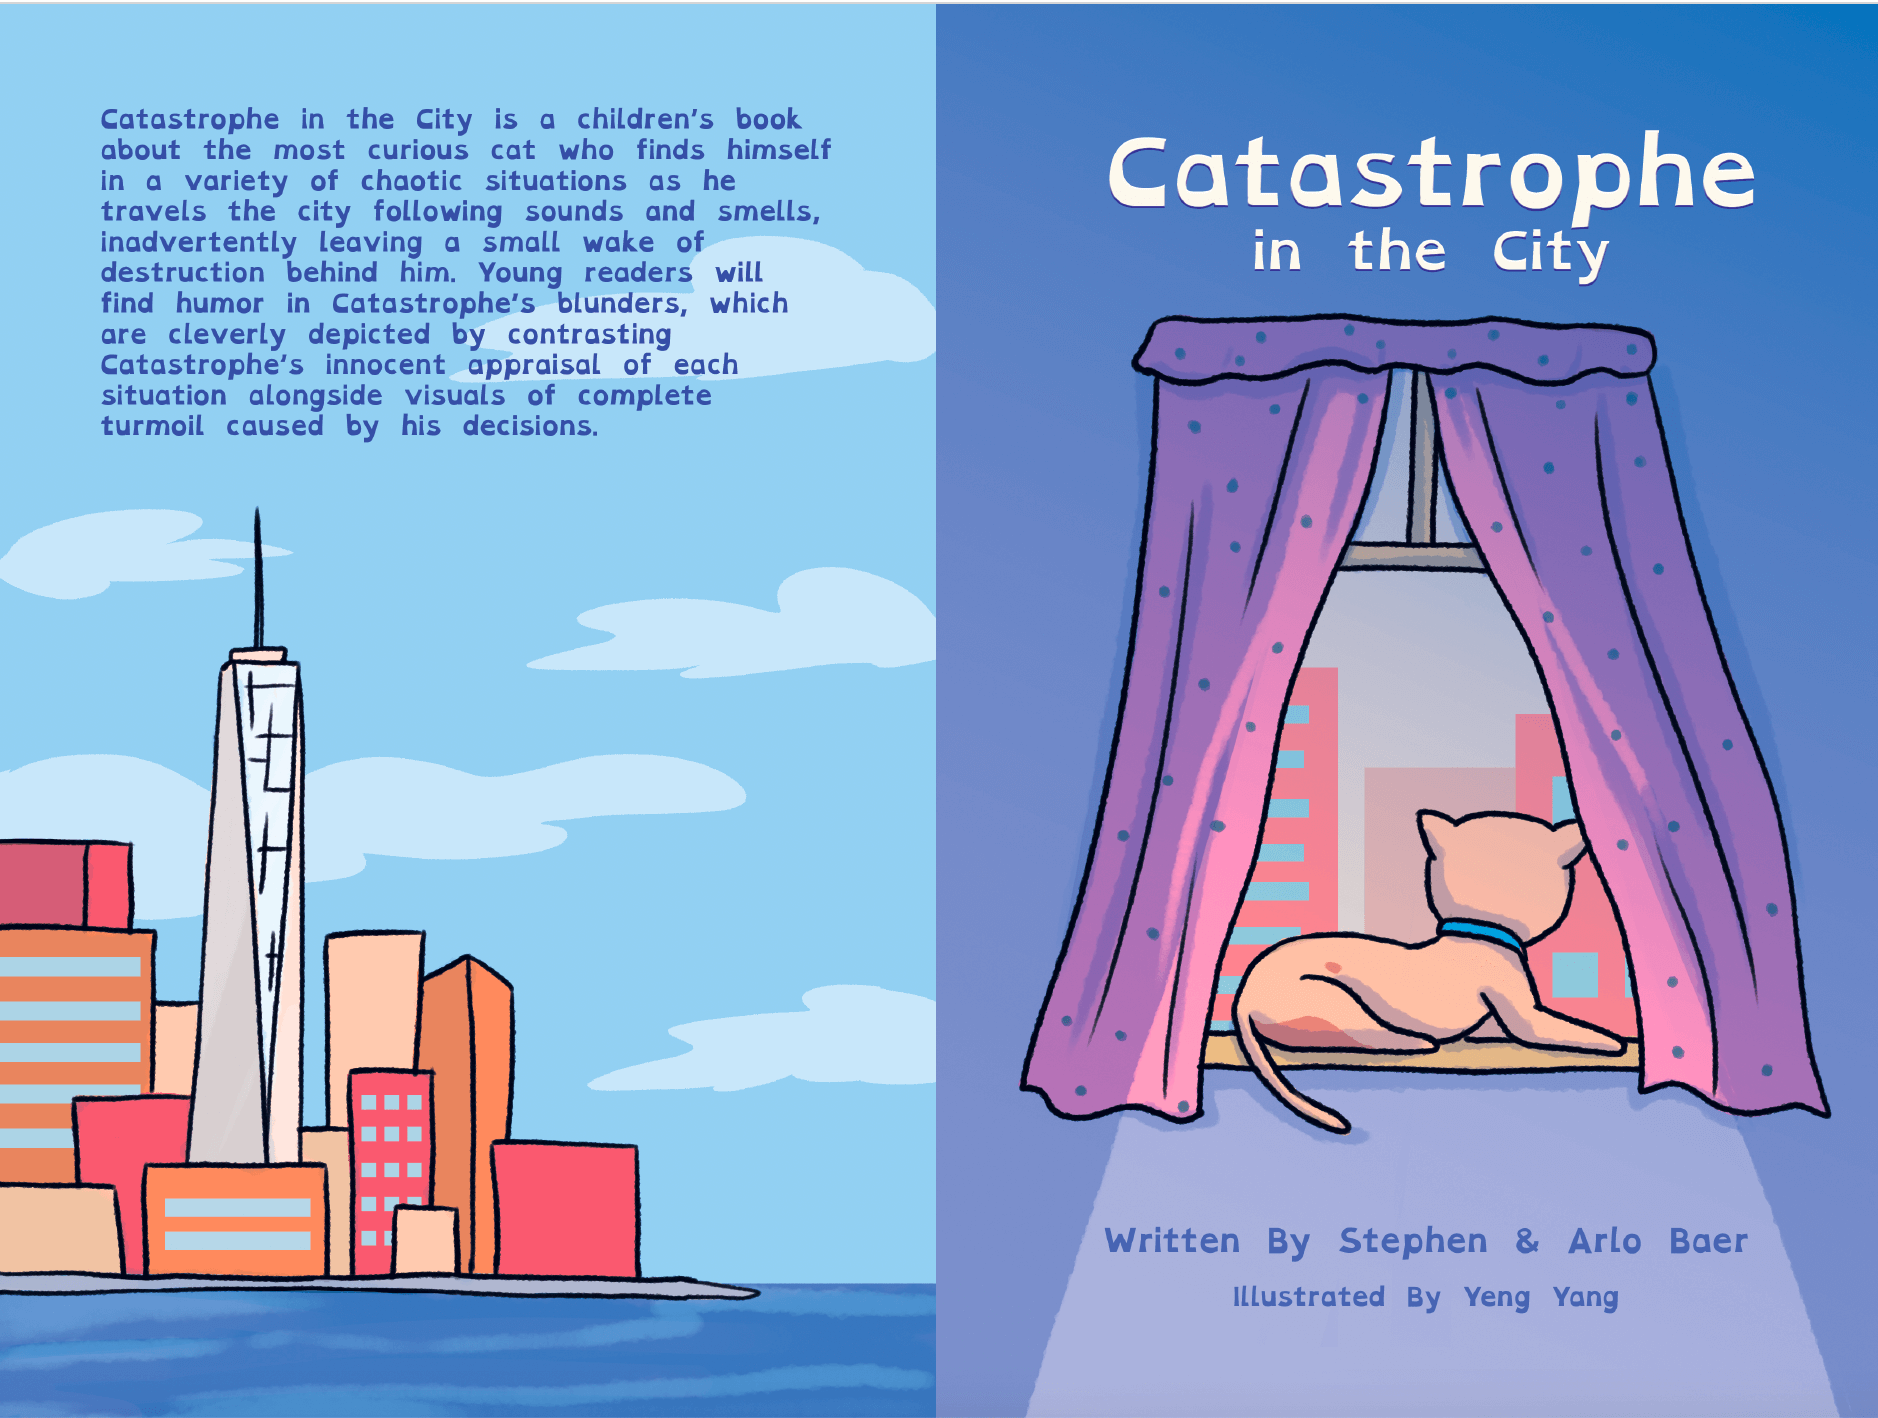 Catastrophe in the City front and back cover